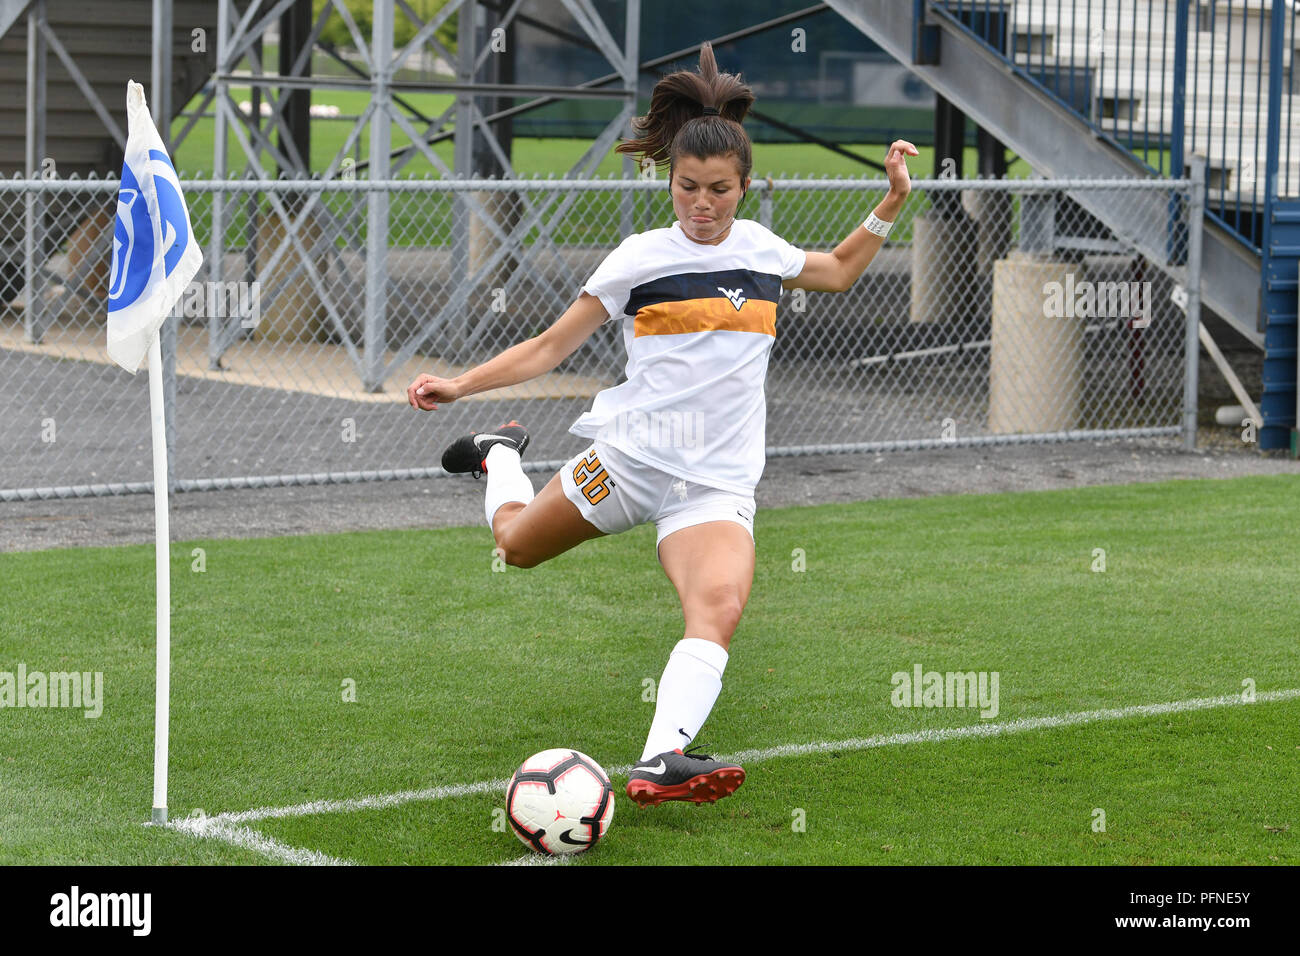 University Park, Pennsylvania, USA. 19th Aug, 2018. WVU women's soccer player VANESSA FLORES (26) takes a corner kick during the NCAA women's soccer match played at Jeffrey Field in University Park, PA. WVU and Arkansas finished in a 1-1 draw after two overtimes. Credit: Ken Inness/ZUMA Wire/Alamy Live News Stock Photo